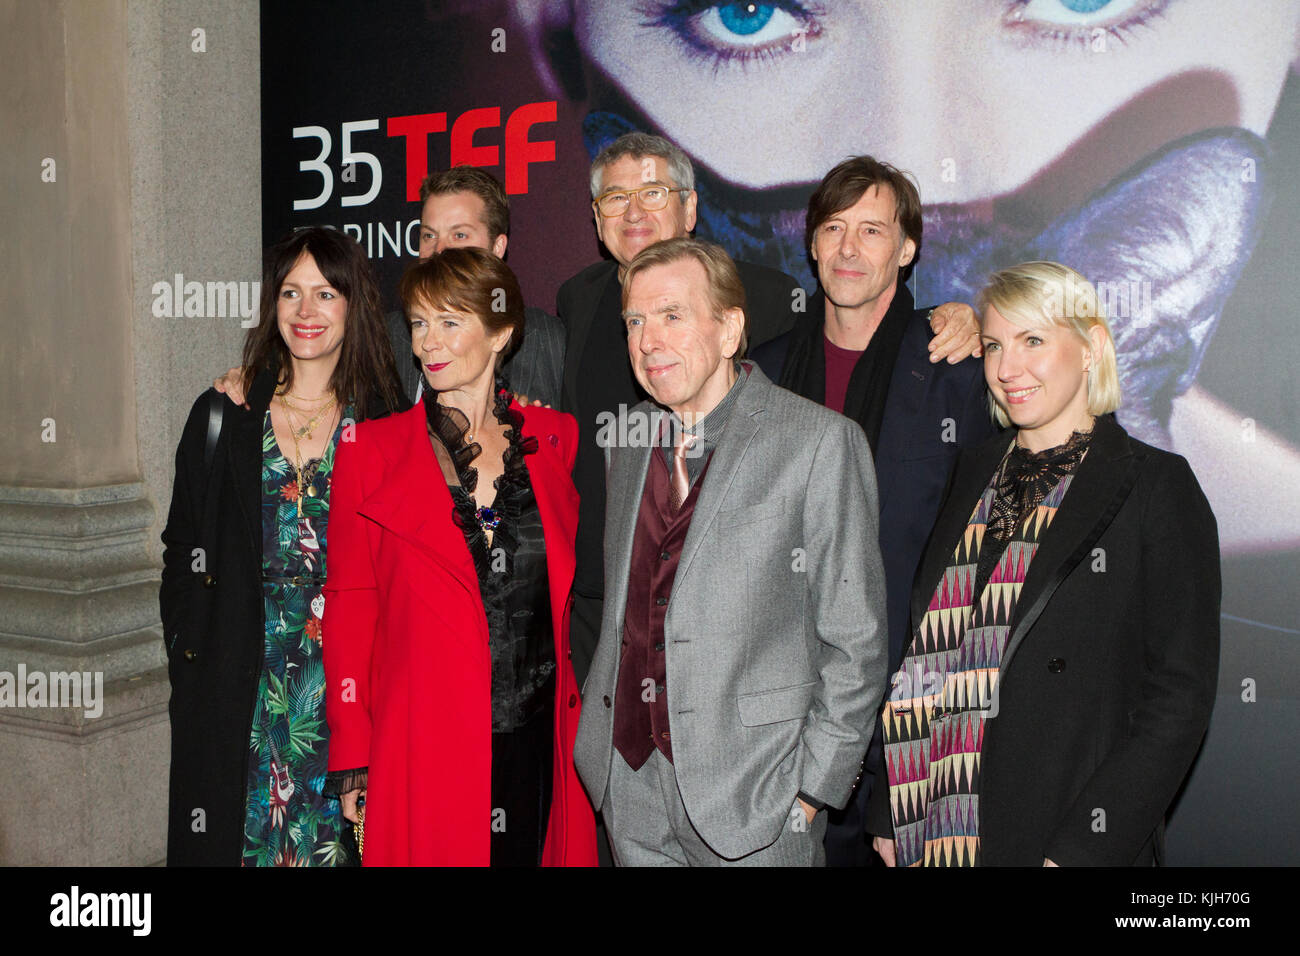 Turin, Italy. 24th November 2017. The cast of 'Finding Your Feet' on red carpet of Turin Film Festival where the film had world premiere screening. Actors Celia Imrie (second from left) and Timothy Spall (third from left) attended with film director Richard Loncraine (center, second line) Credit: Marco Destefanis/Alamy Live News Stock Photo